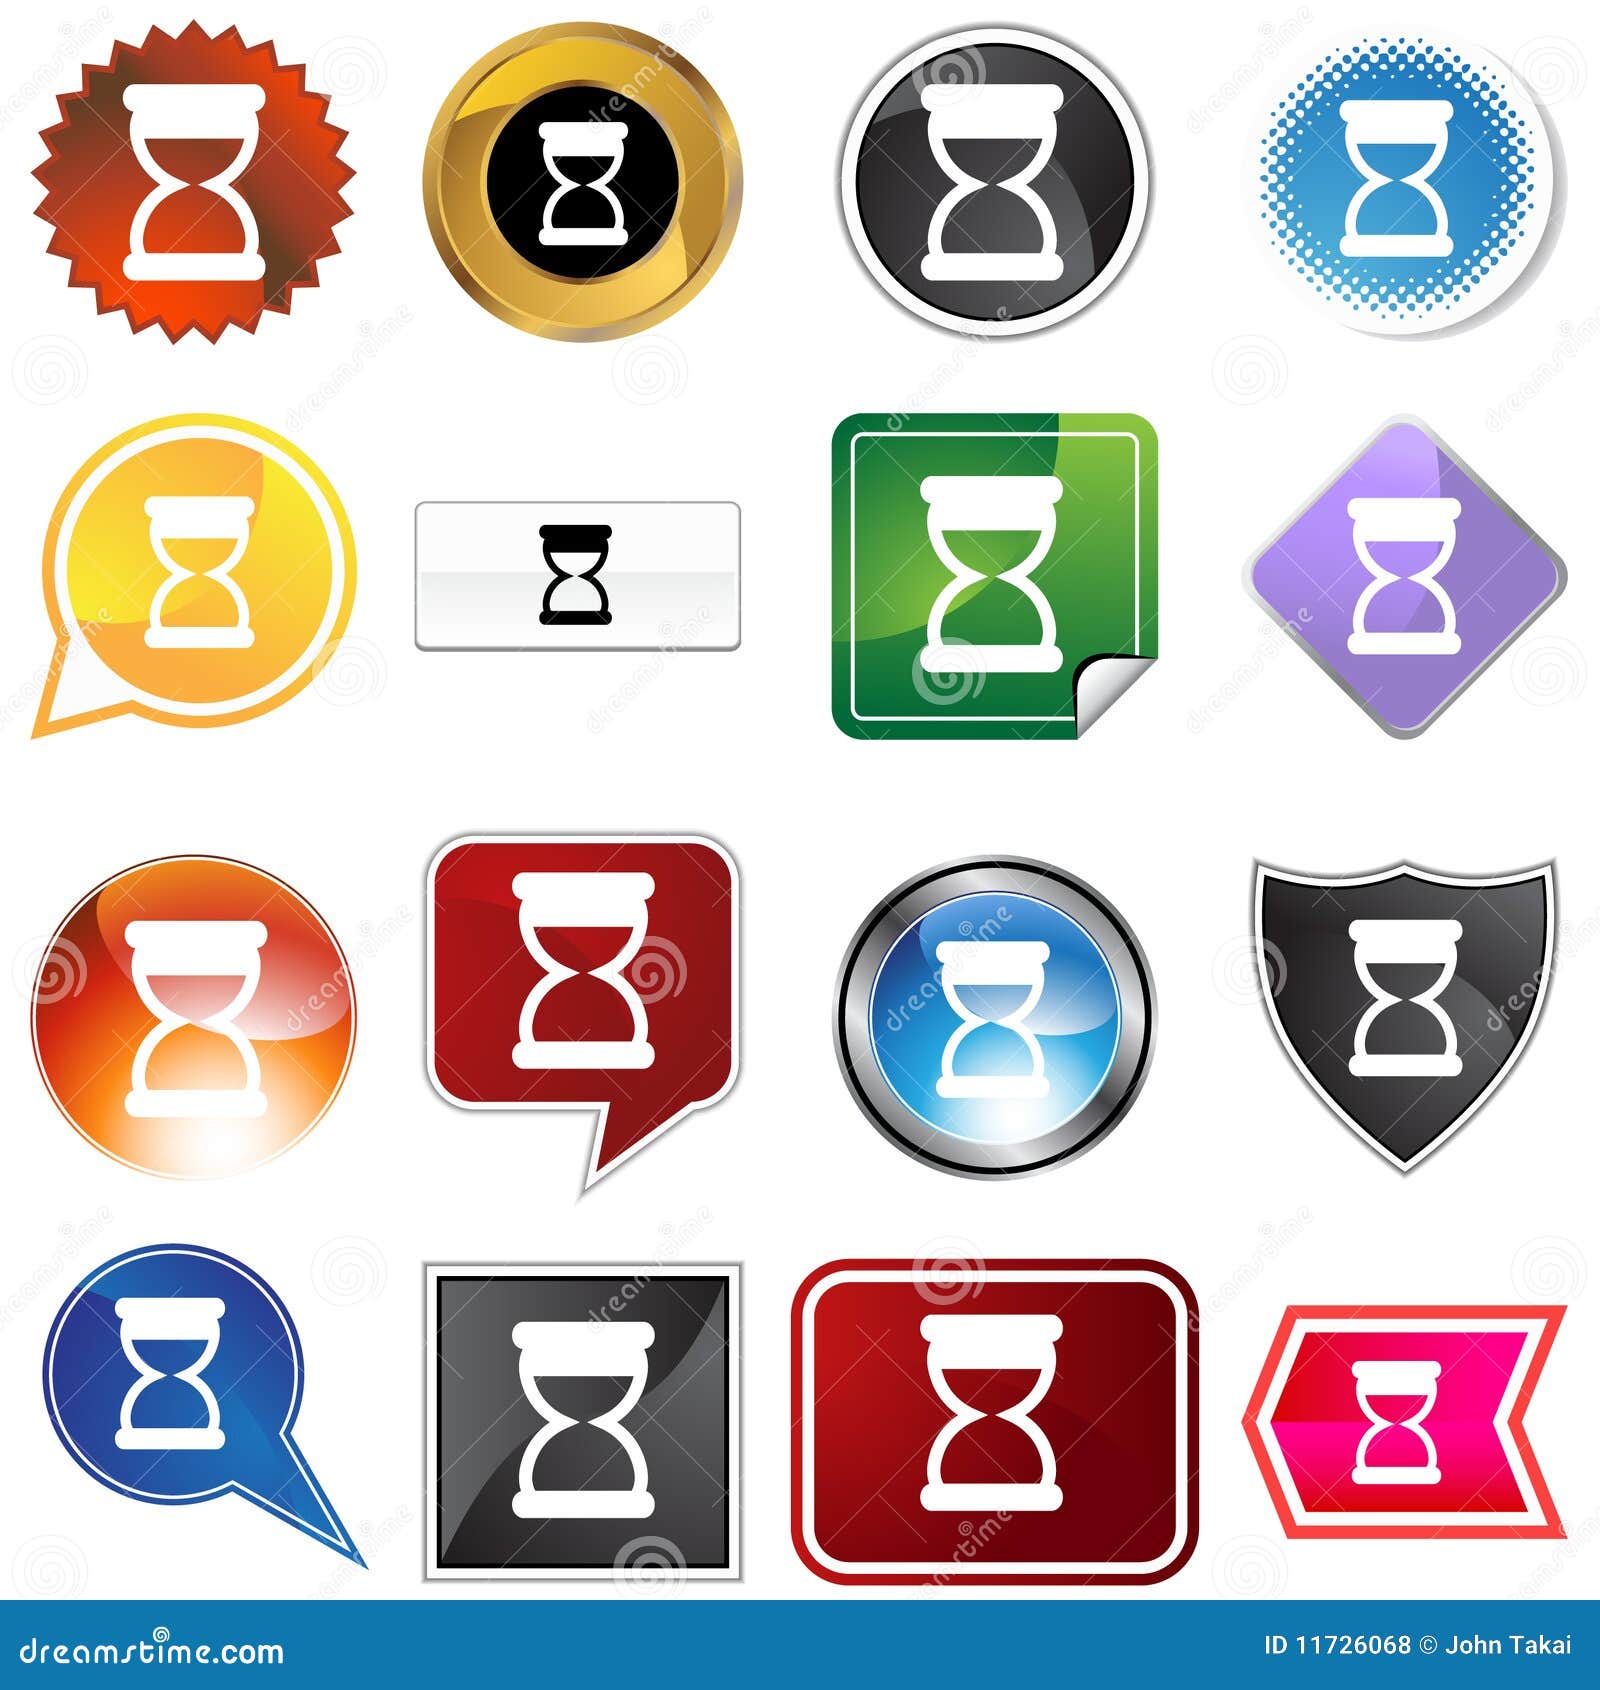 Hourglass Timer Variety Icon Set. Hourglass timer isolated on a white background.